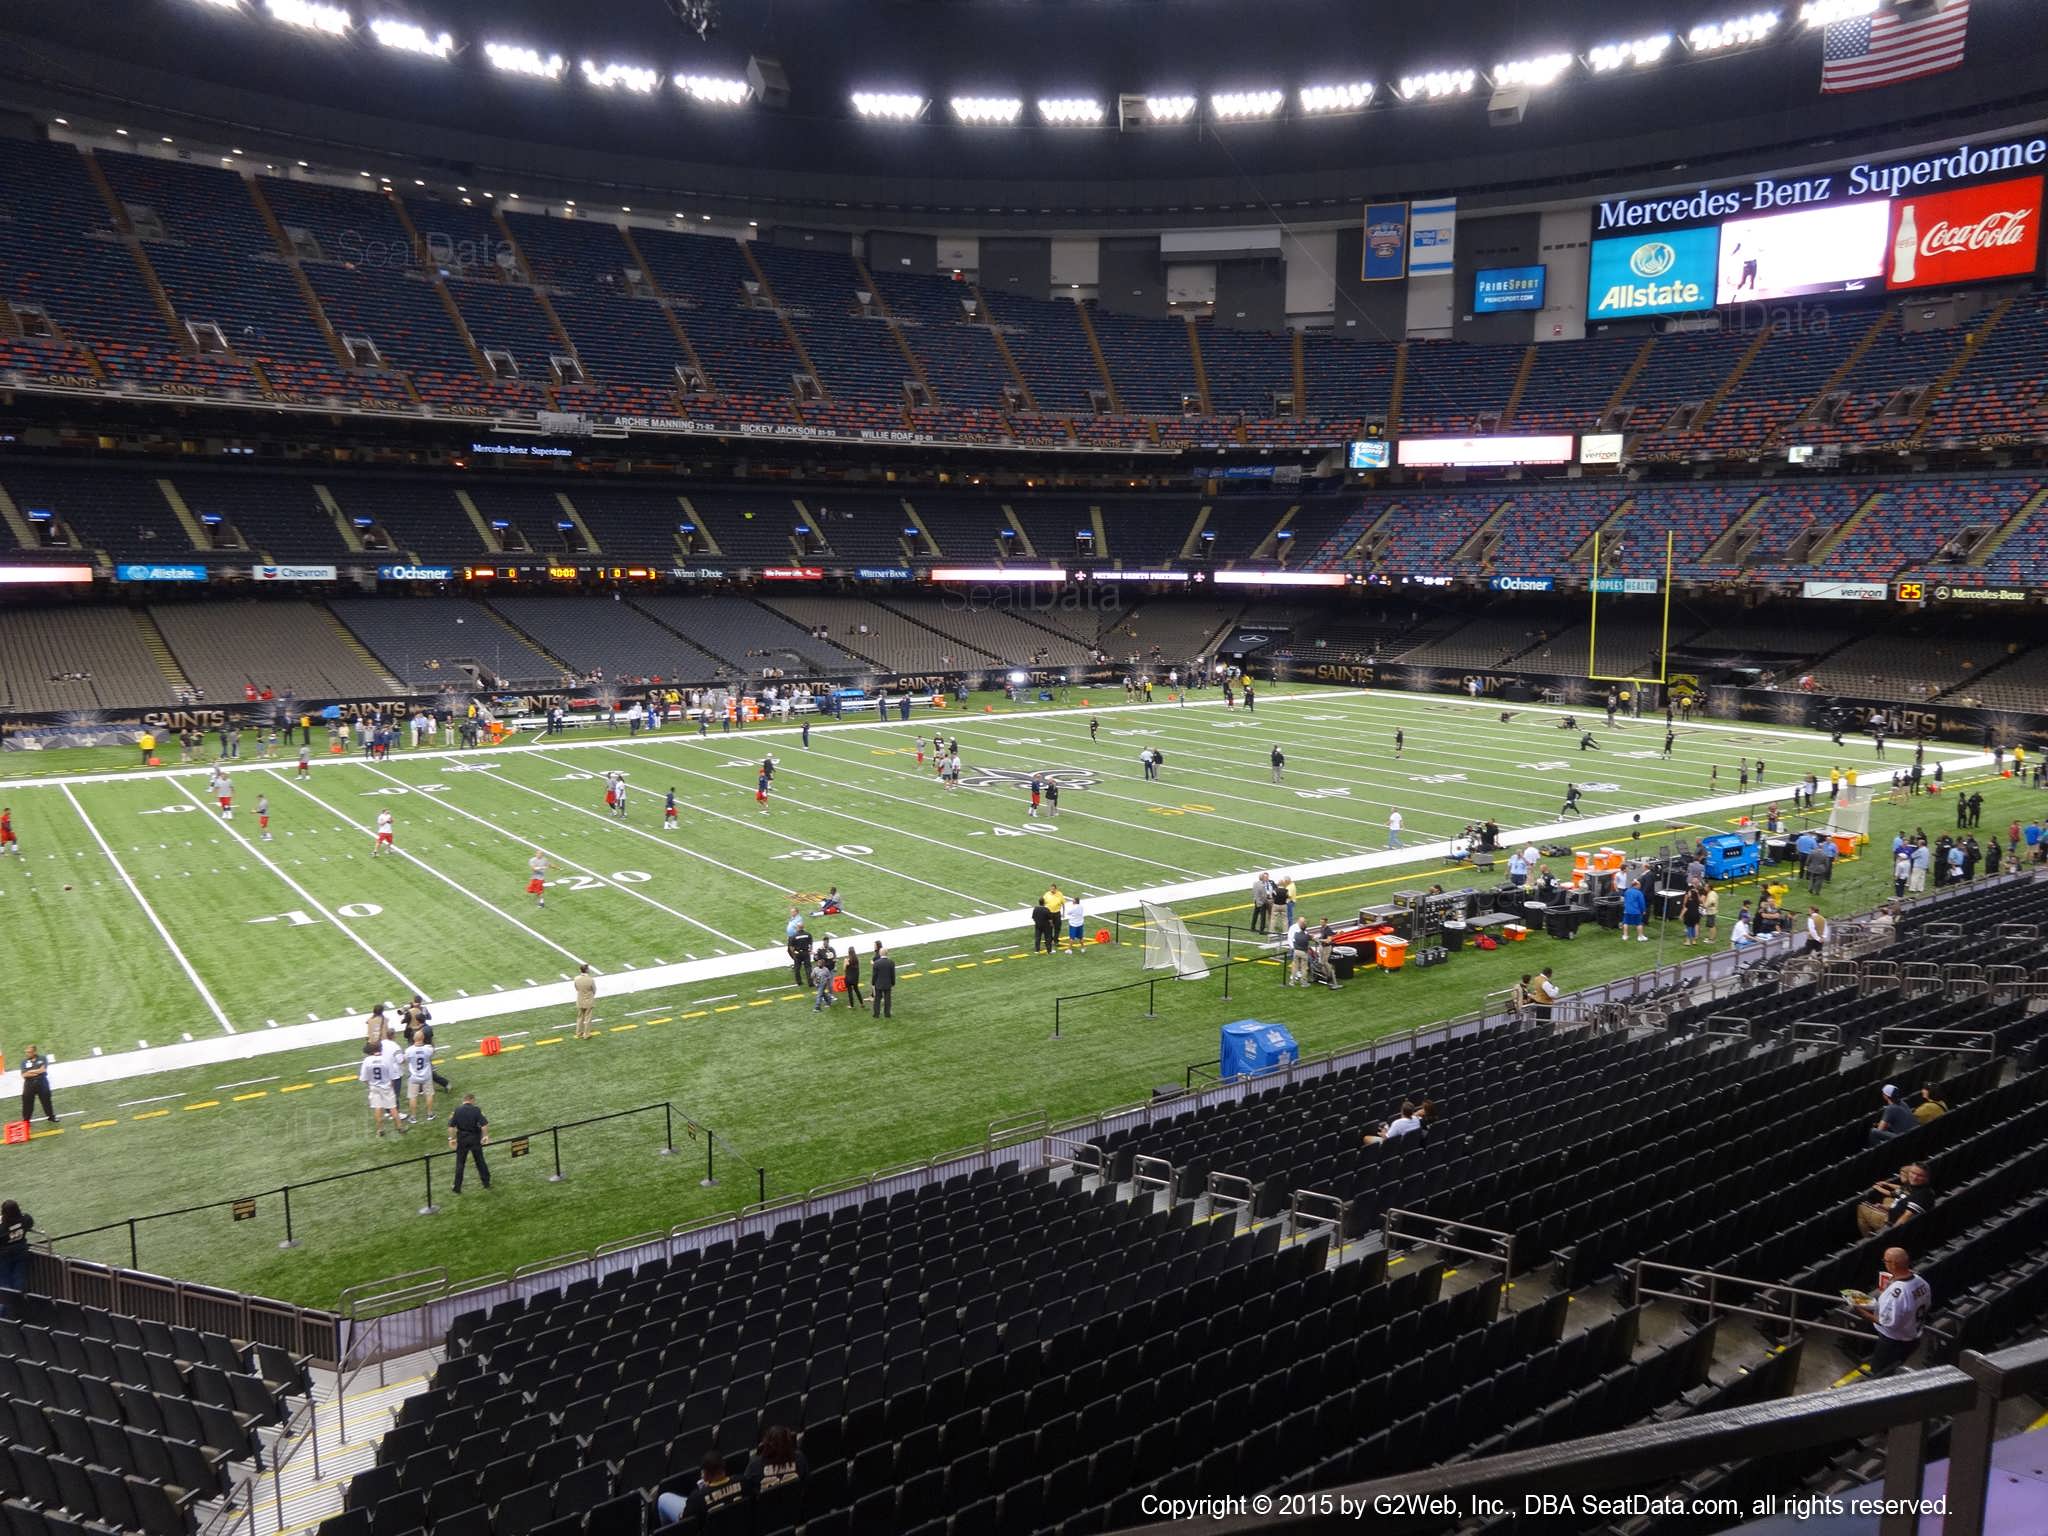 Seat view from section 272 at the Mercedes-Benz Superdome, home of the New Orleans Saints